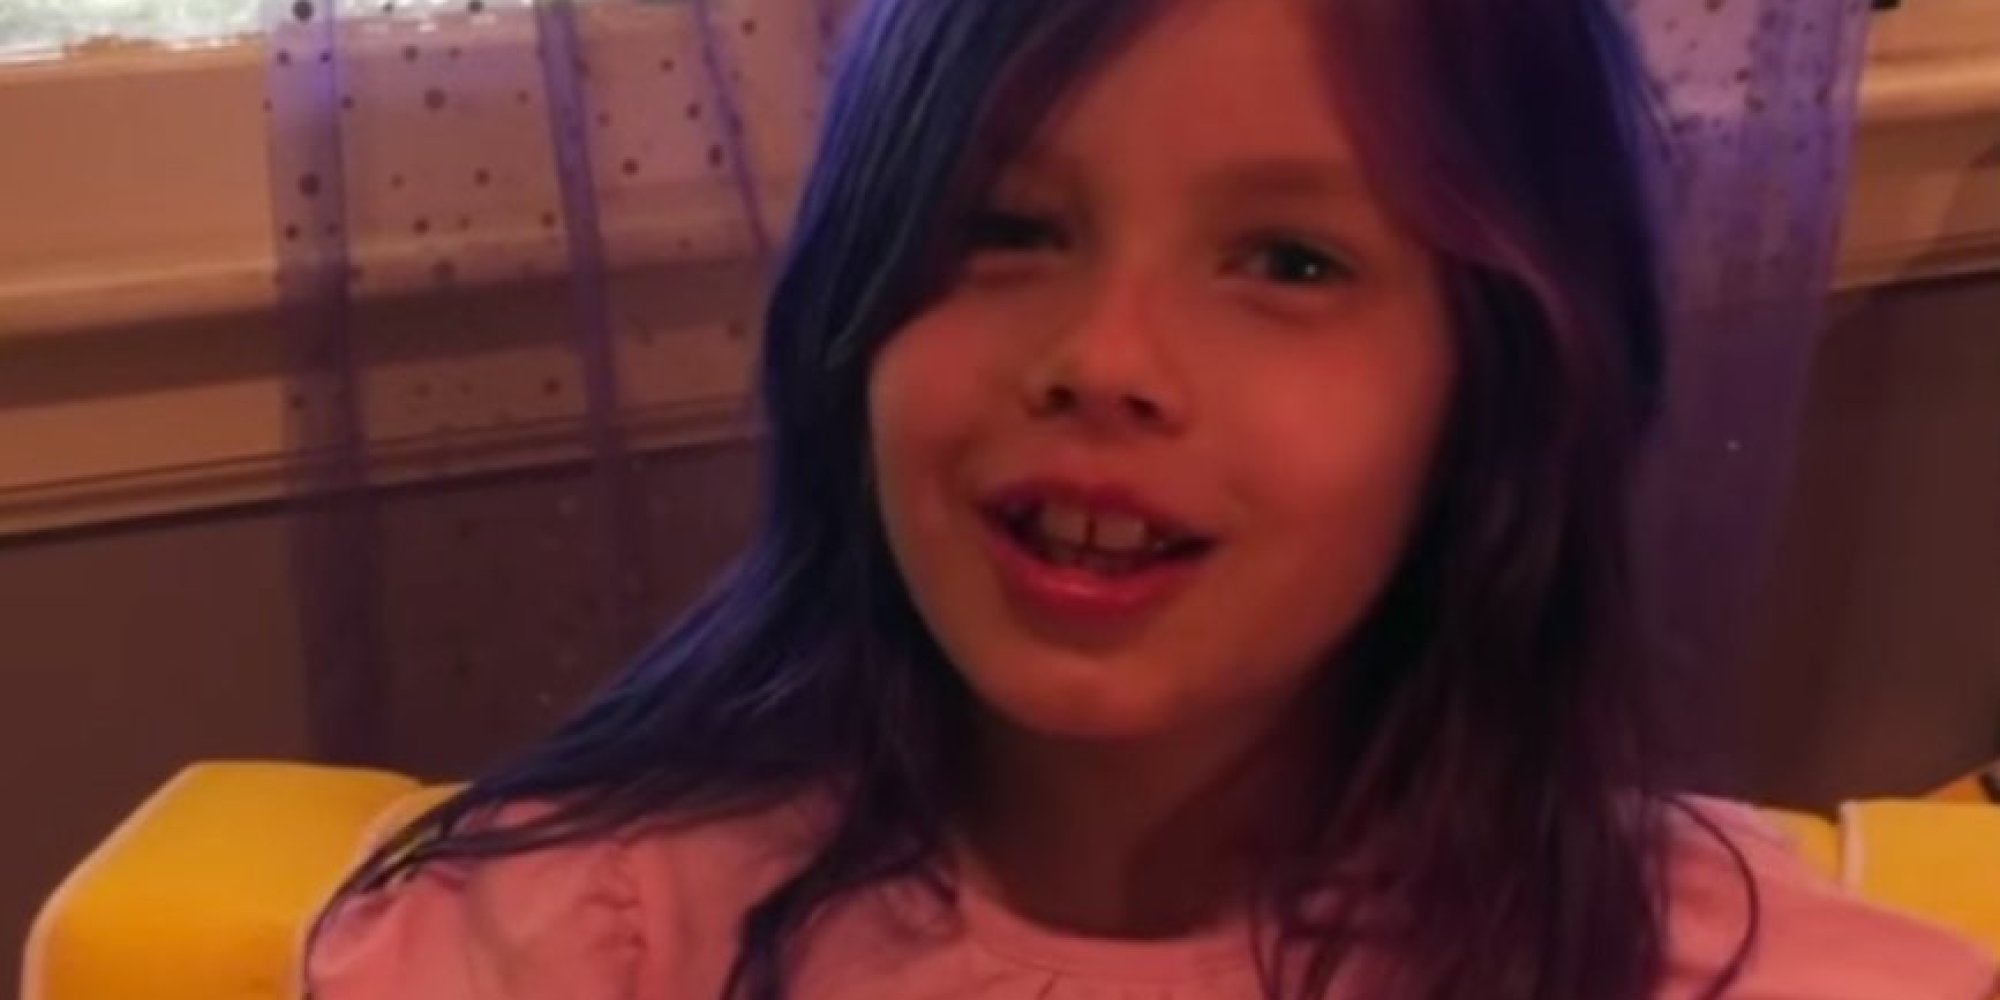 Why We Love 7YearOld Transgender Activist, Avery Jackson, And Her